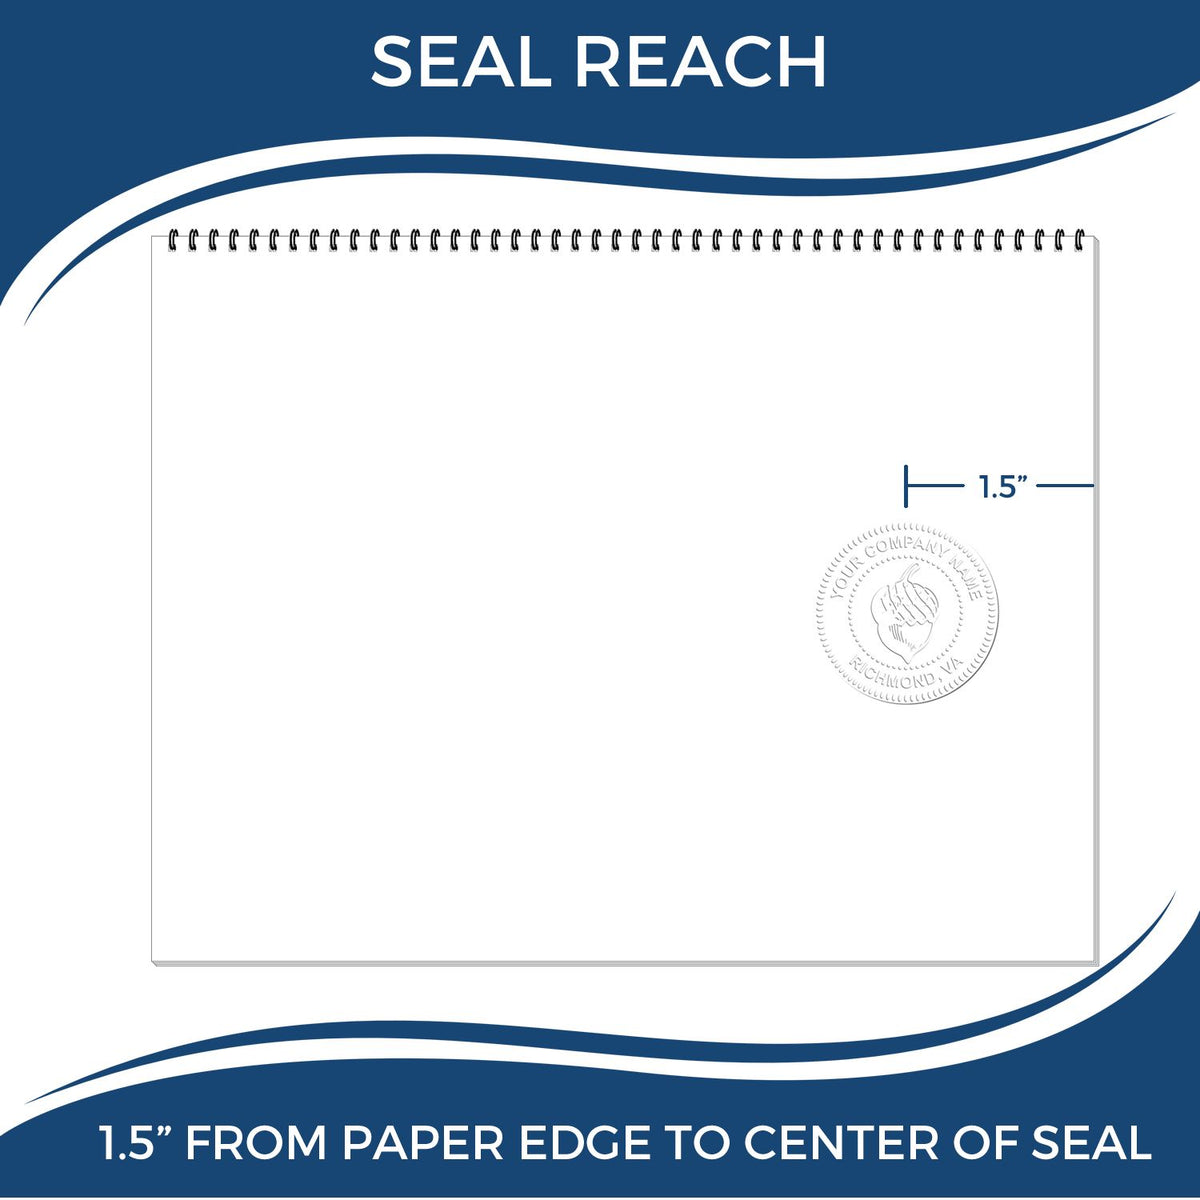 An infographic showing the seal reach which is represented by a ruler and a miniature seal image of the Hybrid South Carolina Engineer Seal